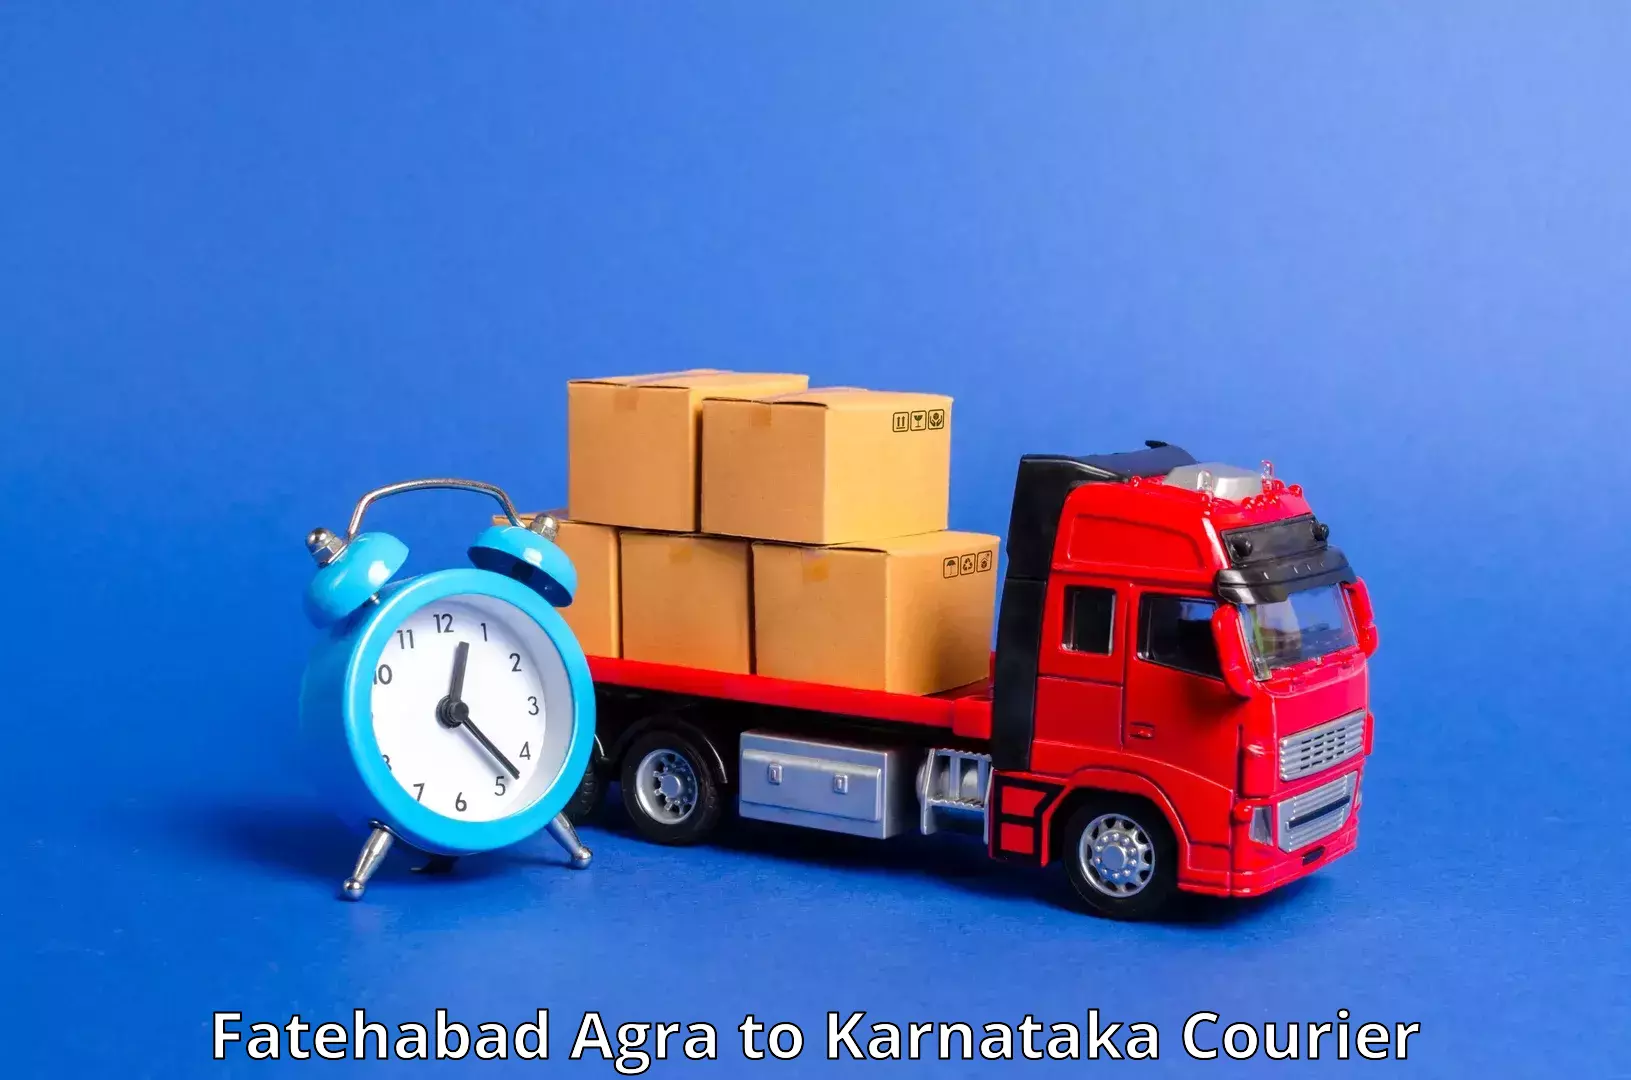 Advanced courier platforms Fatehabad Agra to Turuvekere